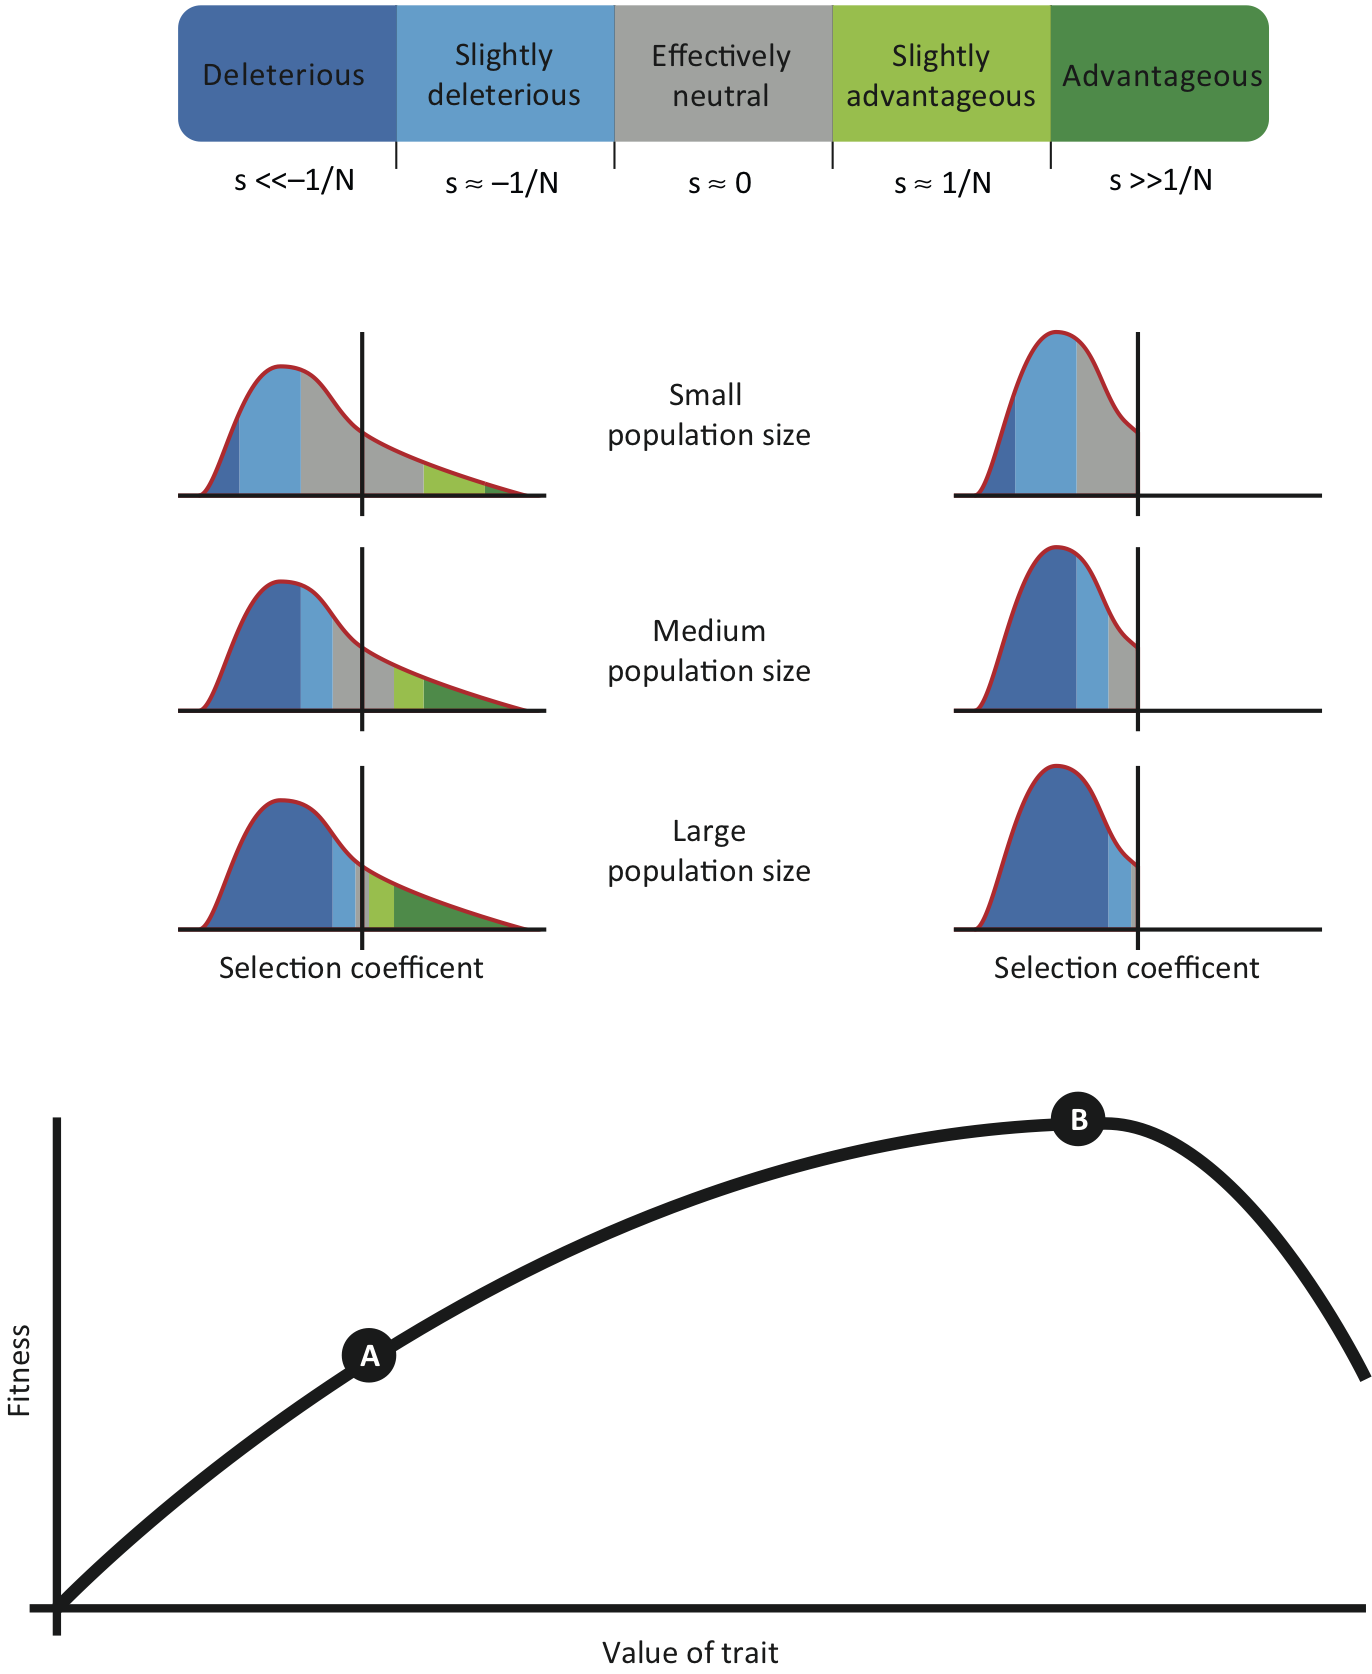 Fitness landscapes and the distribution of fitness effects. Hypothetical distributions of fitness effects for populations of different sizes at different positions on a simple fitness landscape. A population far from the optimum (A) has a certain proportion of mutations that confer increases in fitness. However, a population at the hypothetical optimum of the landscape (B) cannot increase it fitness, so all mutations are deleterious. In both cases, the proportion of mutations that fall into different categories (Box 2, main text) changes depending on the effective population size. Note that, for simplicity, we have drawn a fitness landscape that varies along a single dimension, but the distributions we have drawn are more similar to those that would come from higher-dimensional fitness landscapes. Furthermore, it is unlikely that any natural population sits at the precise optimum of any fitness landscape. The selection coefficients are shown on natural scales, not log-transformed scales. Figure and caption from [Lanfear et al. 2014](http://dx.doi.org/10.1016/j.tree.2013.09.009).